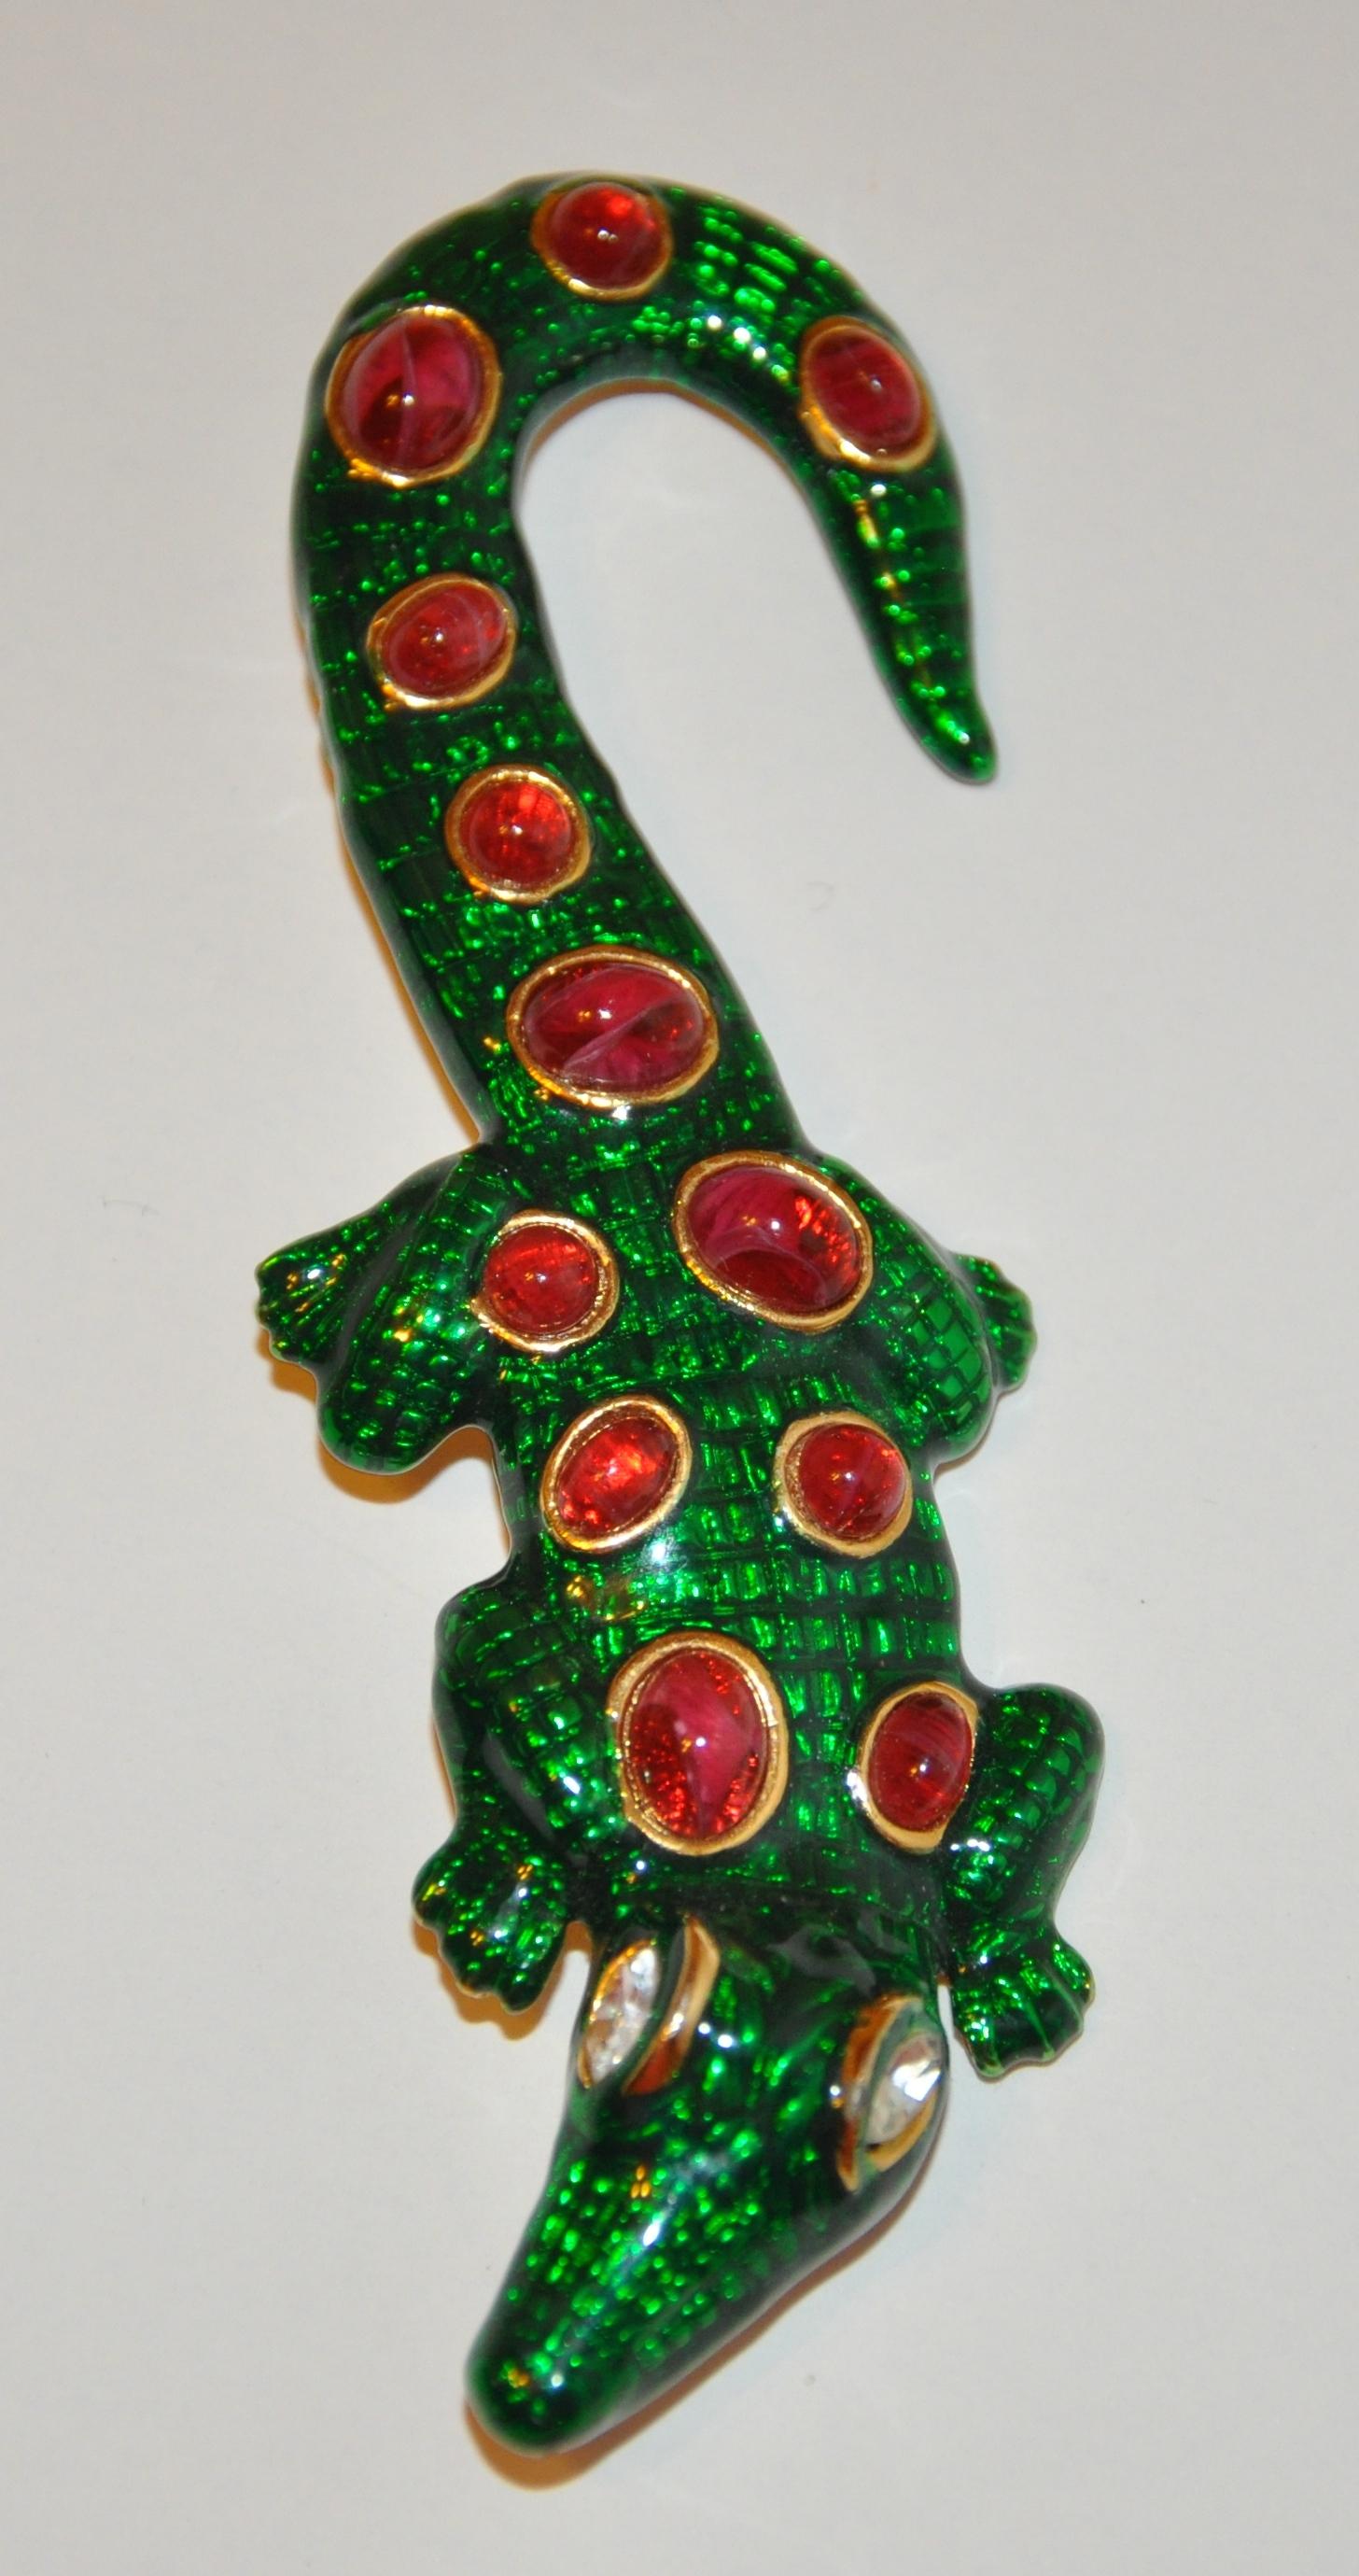 Kenneth Lane Whimsical Green Enamel with Ruby-Like Accent 